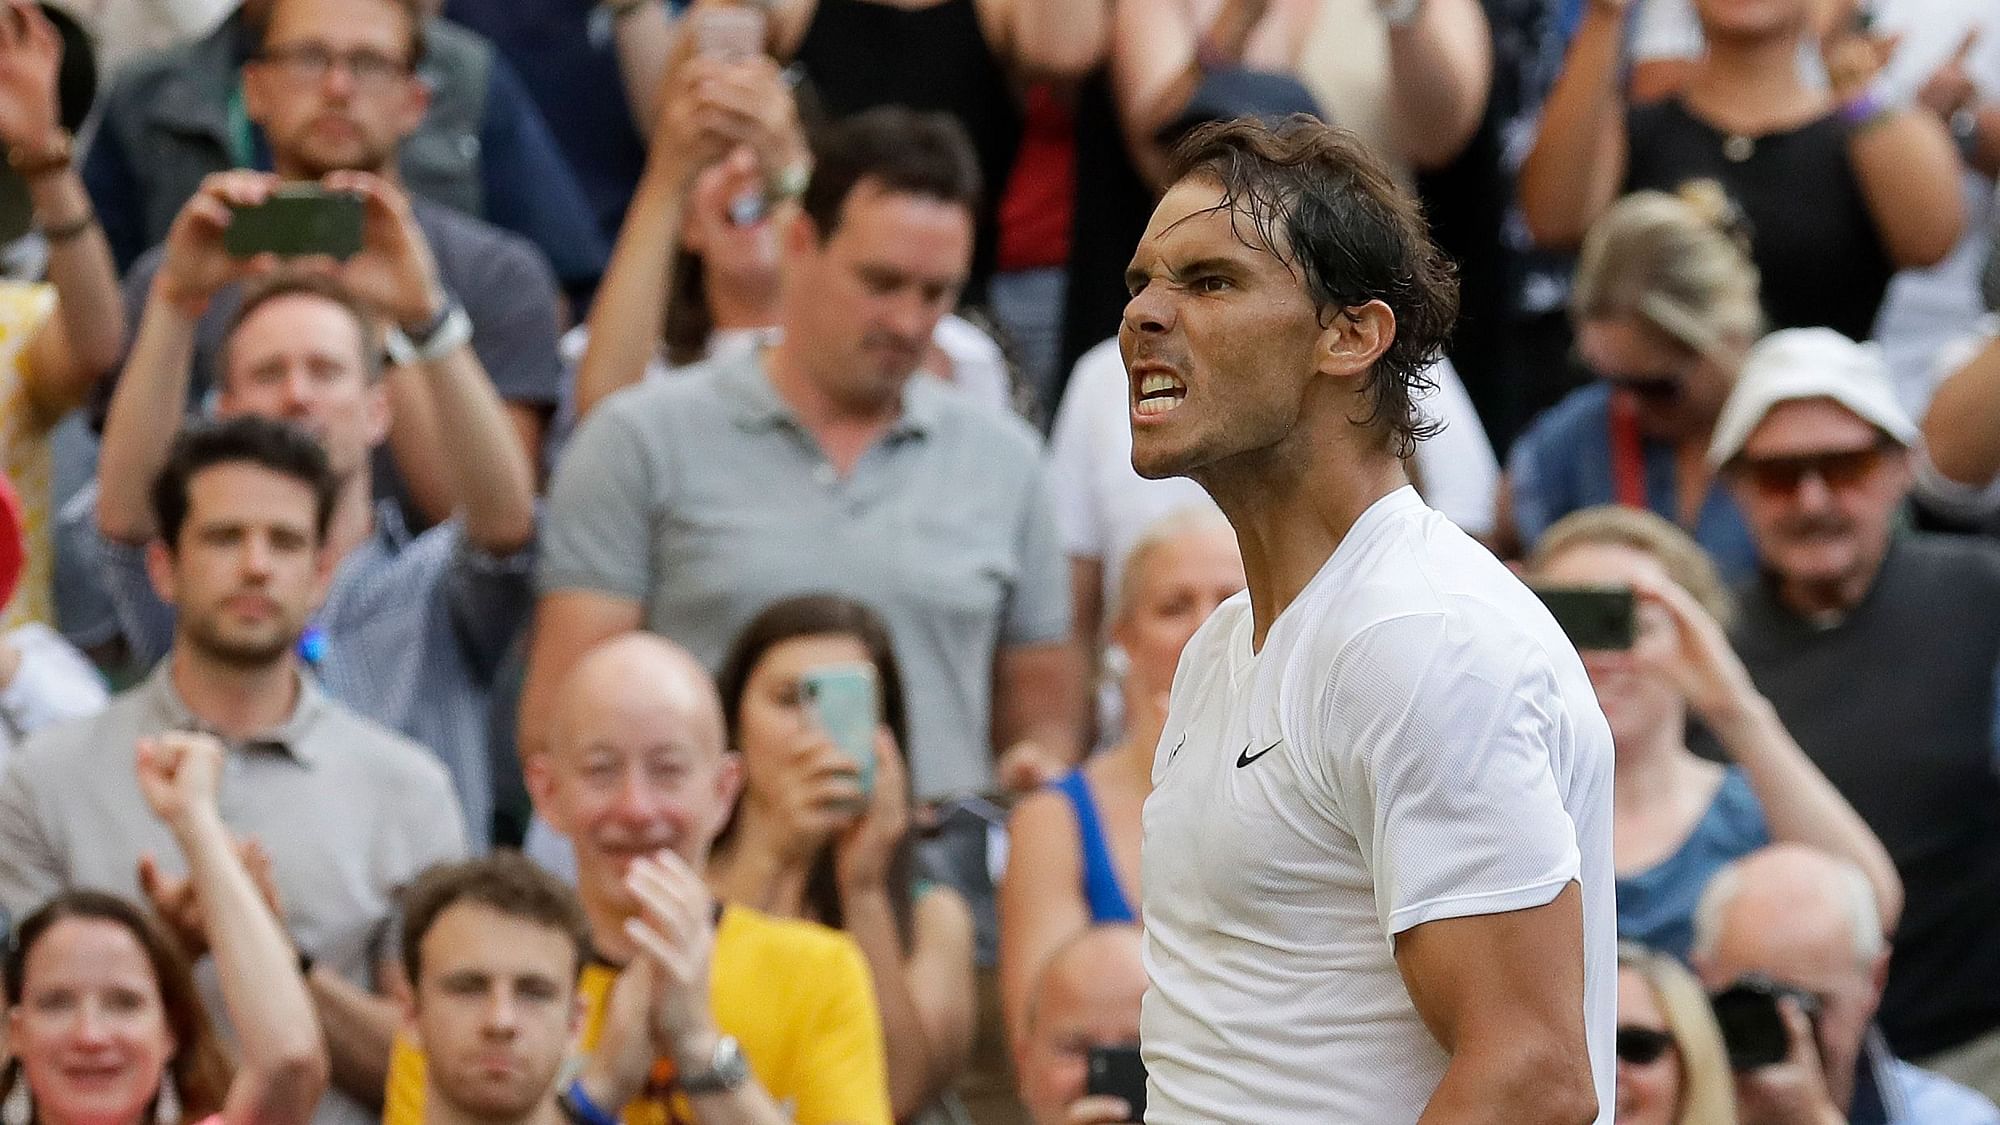 Rafael Nadal celebrates after beating Nick Kyrgios in the second round of the 2019 Wimbledon.